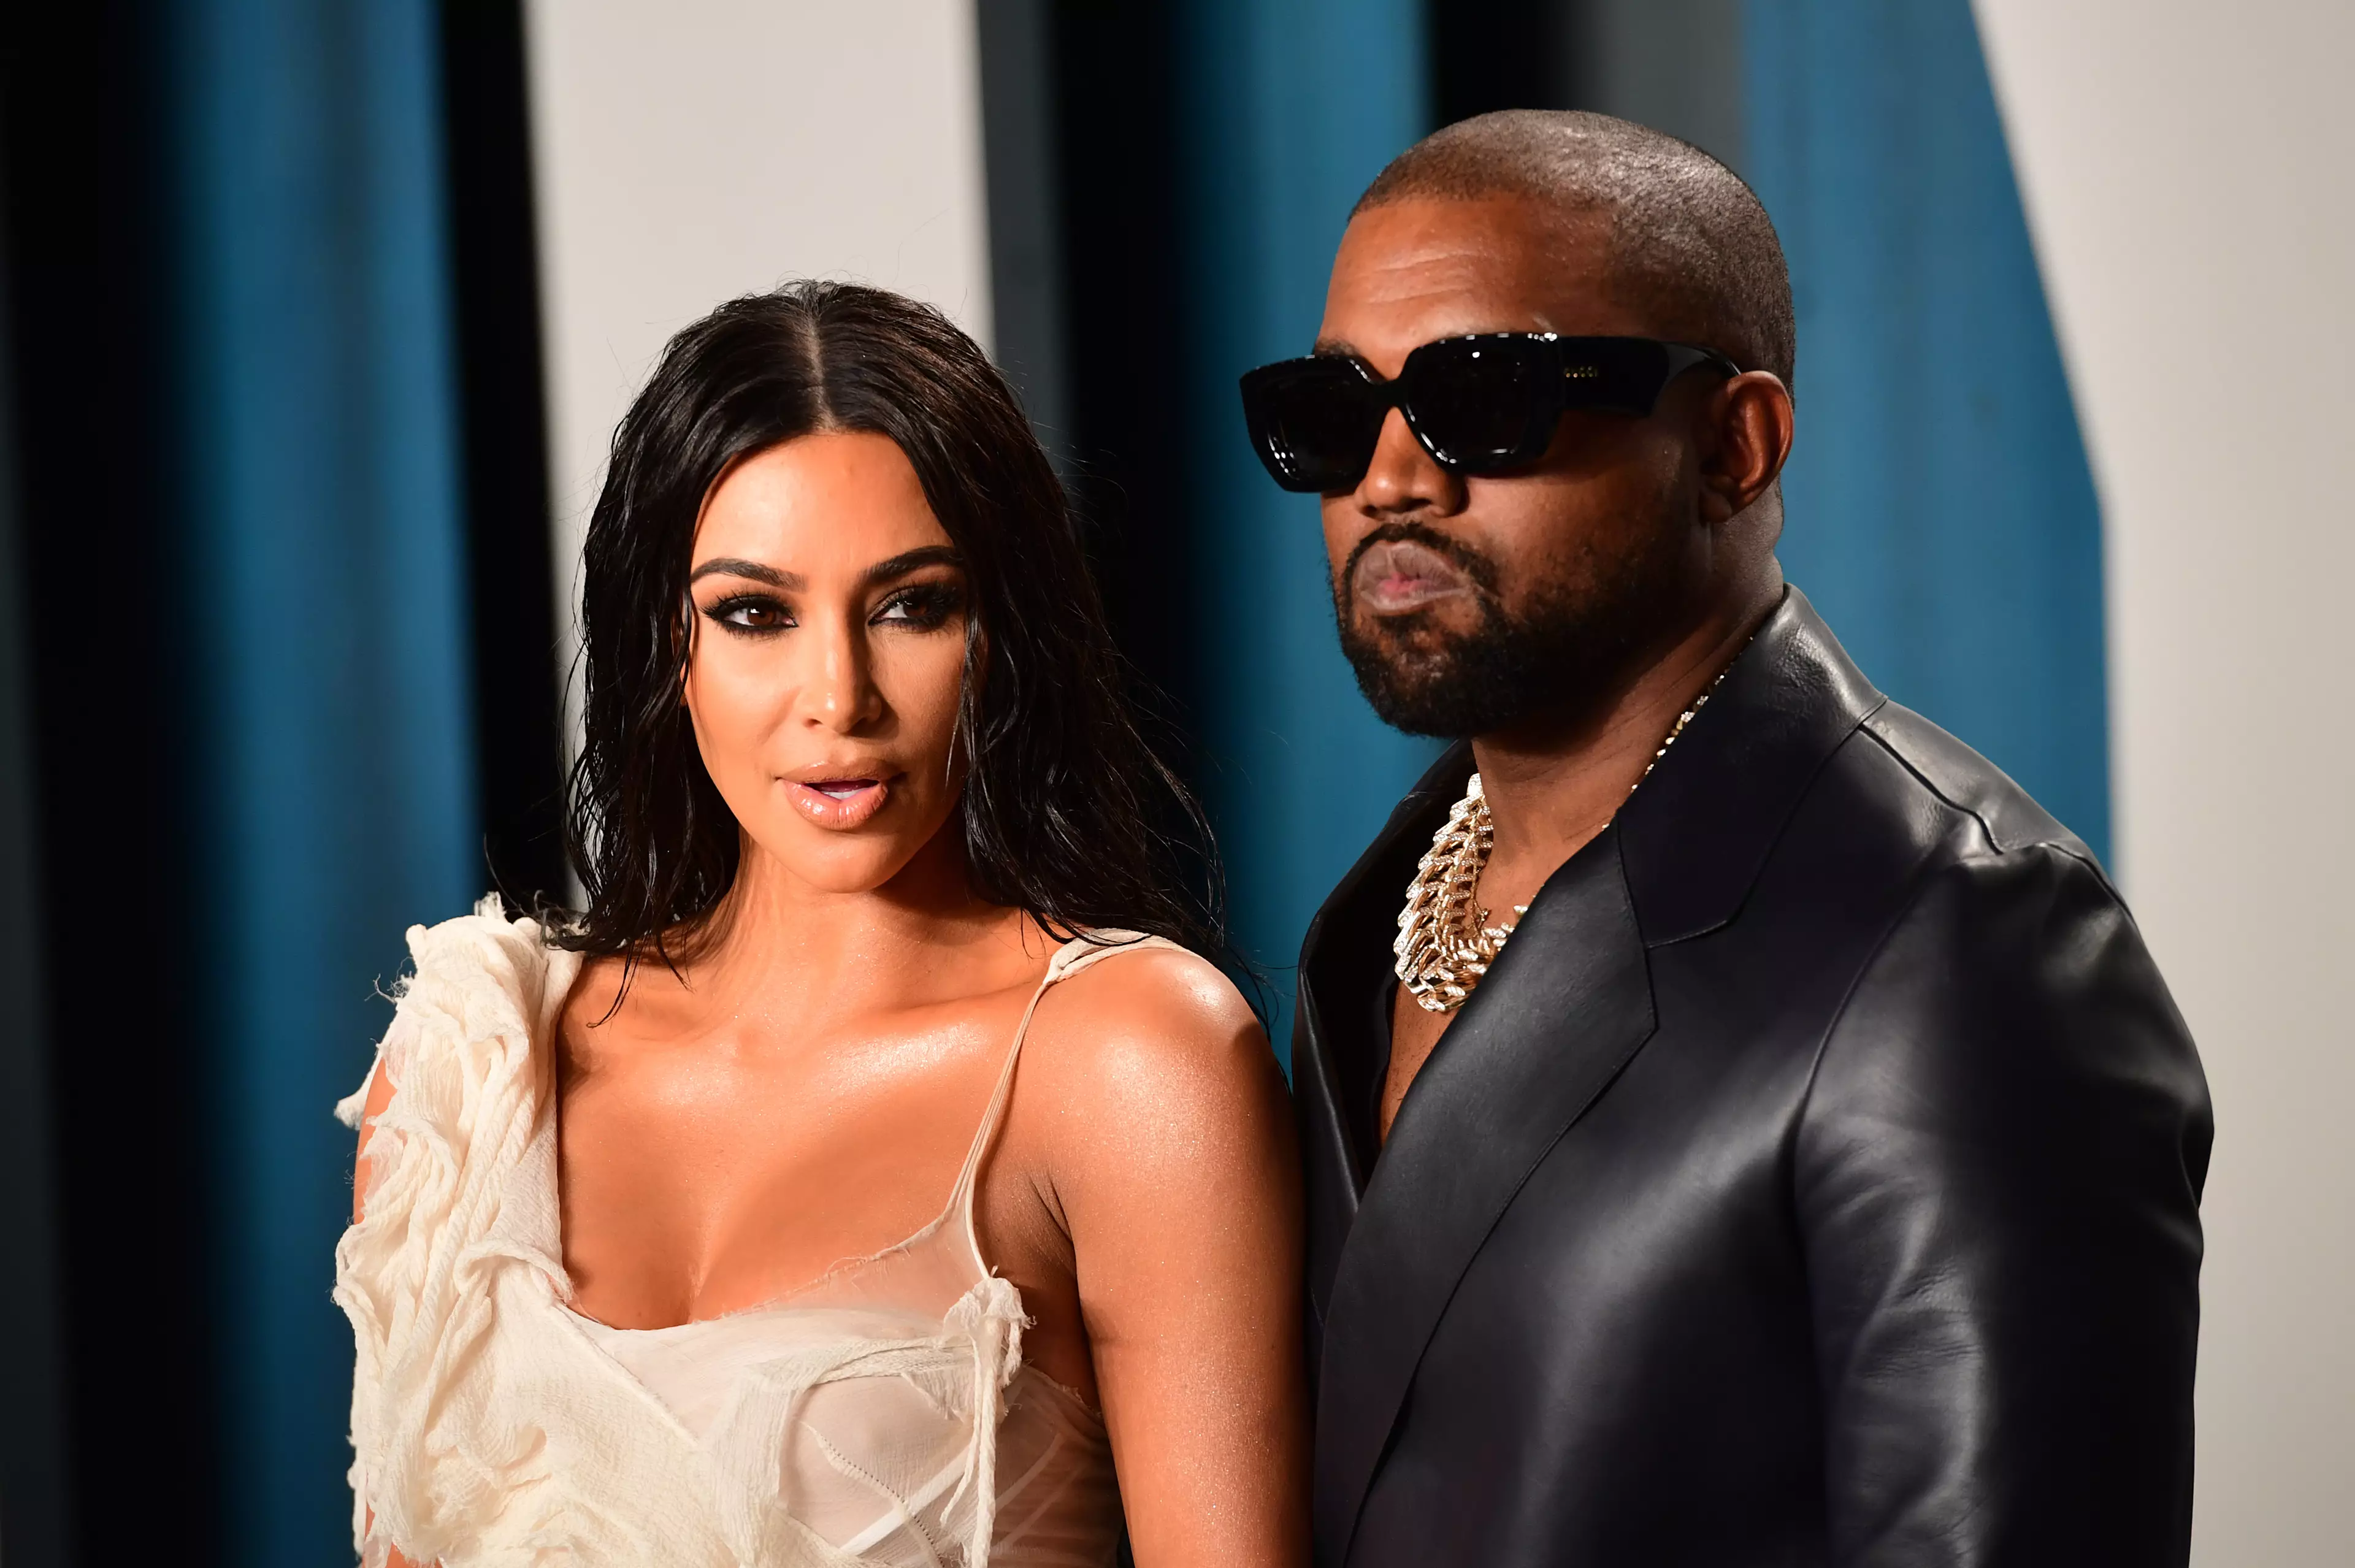 Kanye West and Kim Kardashian filed for divorce earlier this year.